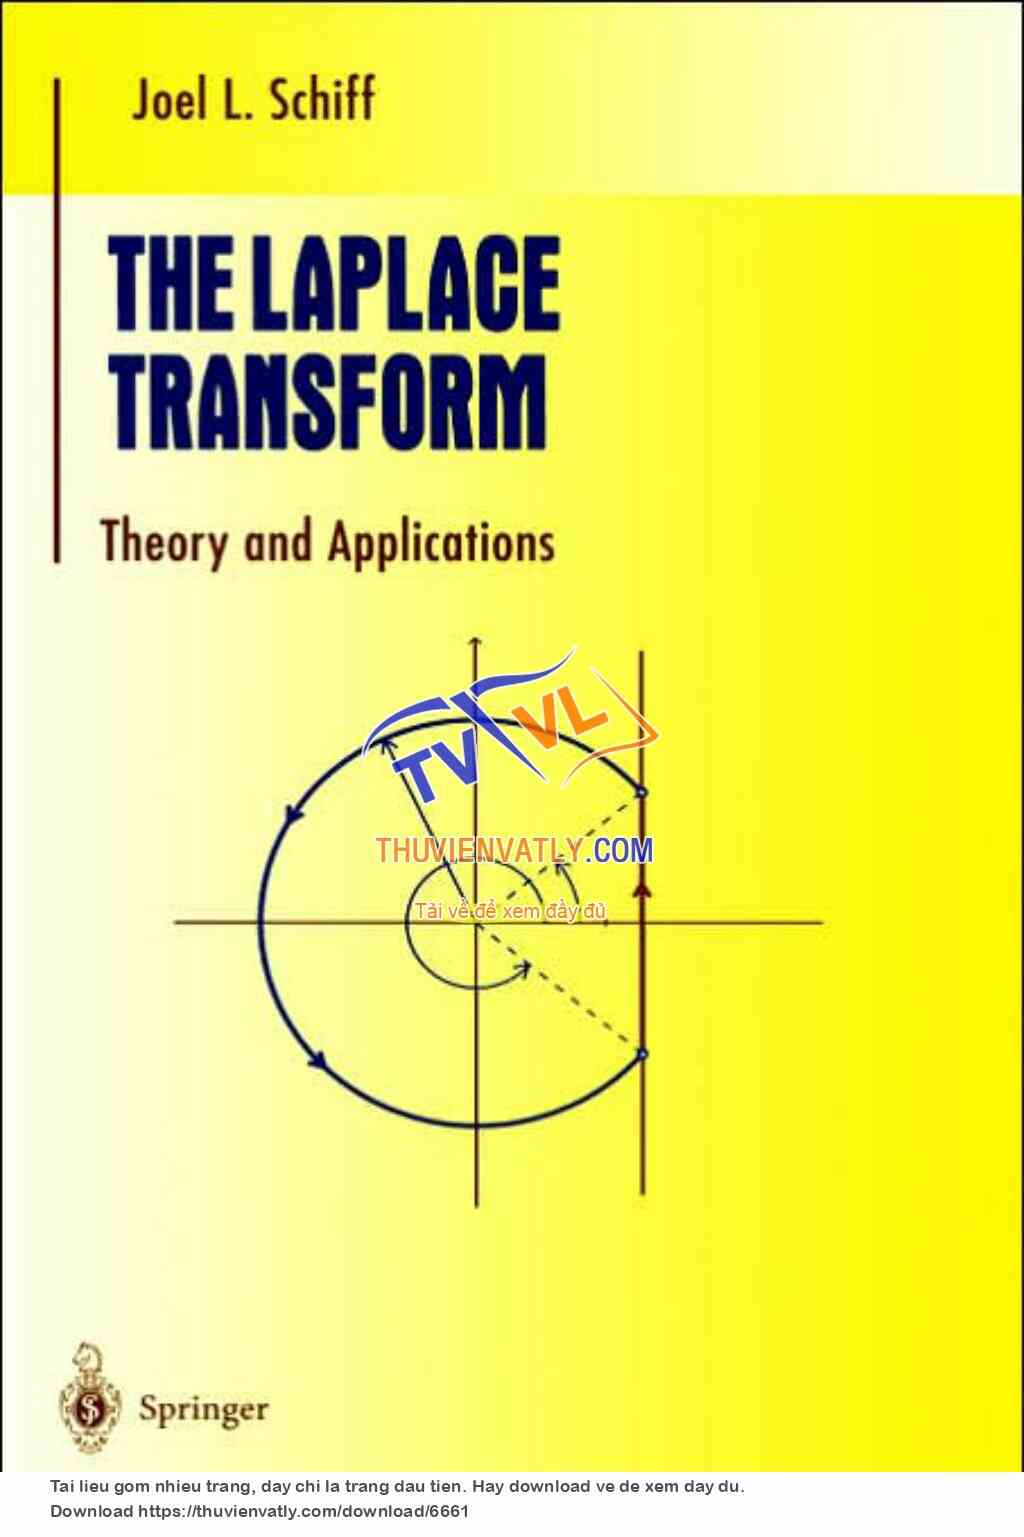 The Laplace Transform - Theory and Applications